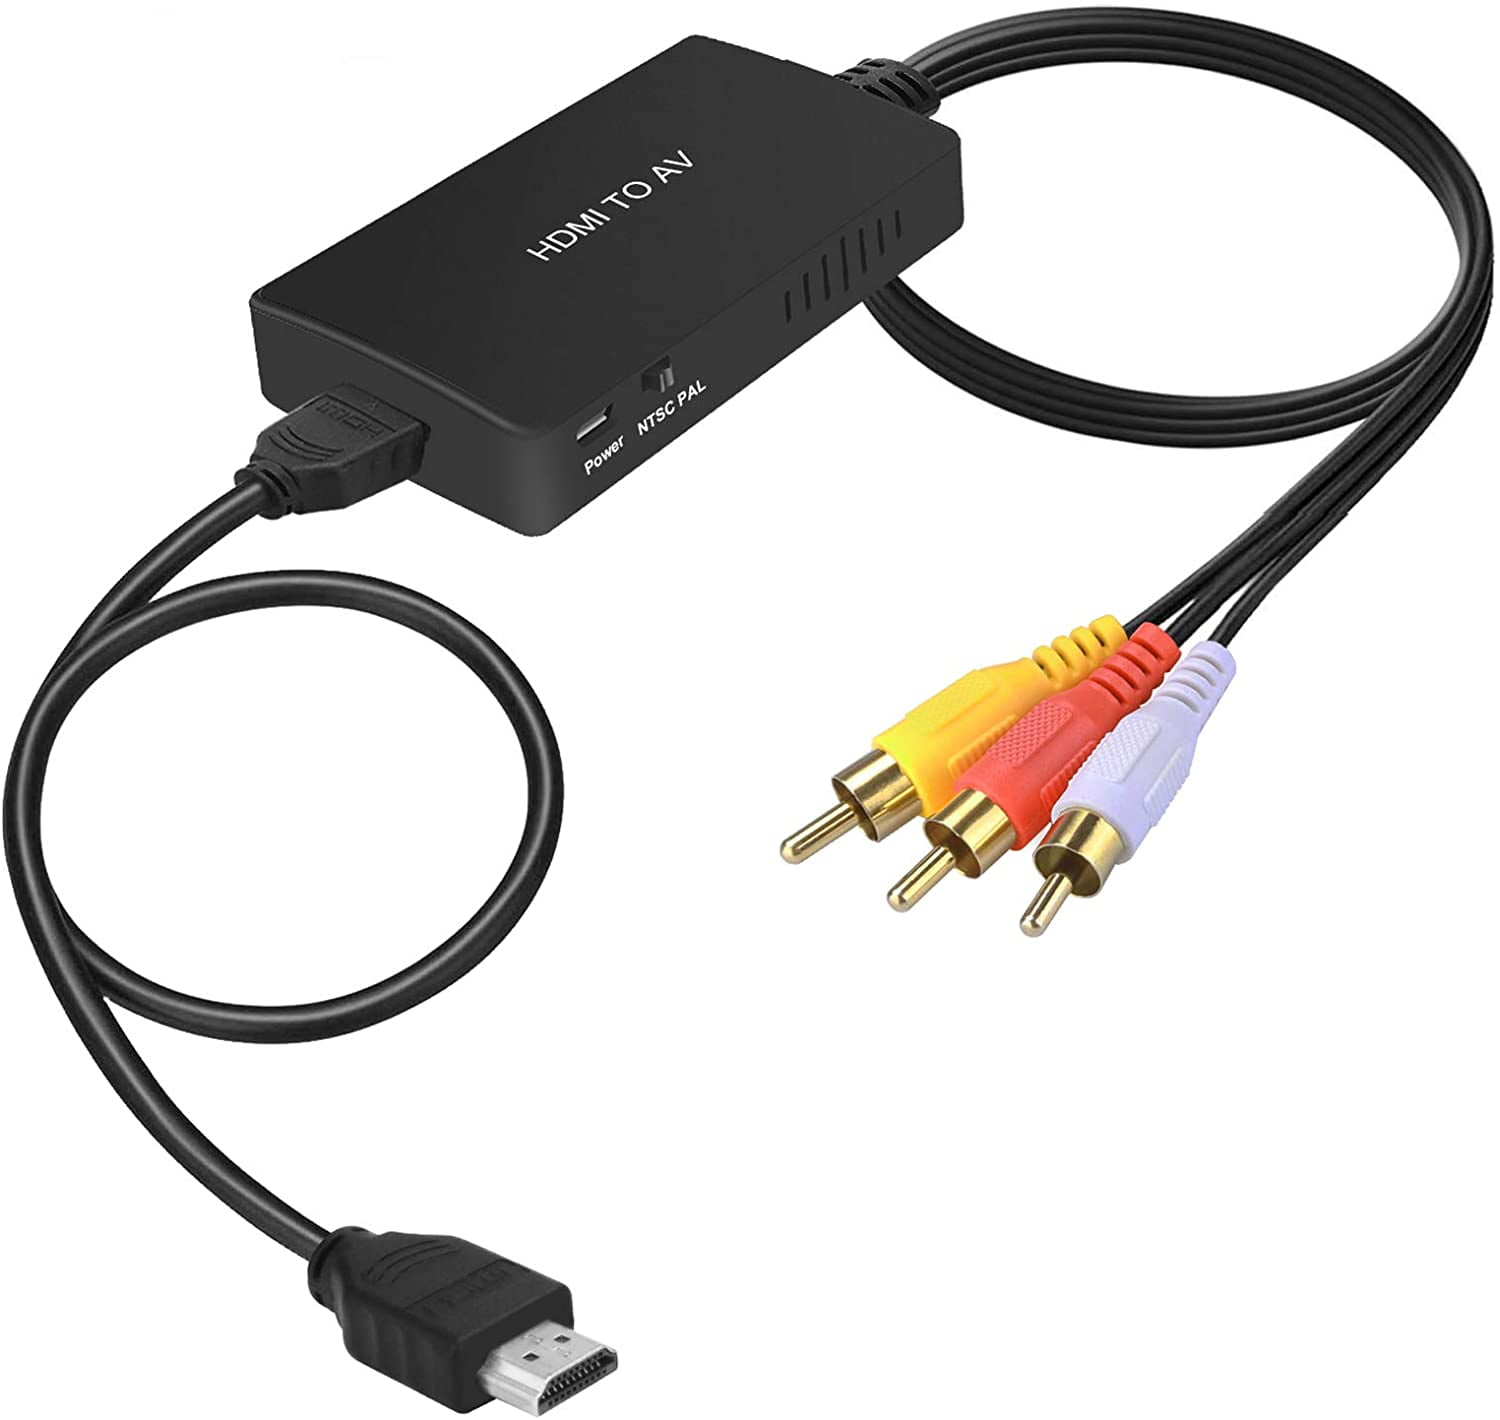 HDMI to RCA Converter, HDMI to AV Composite Video Audio Converter Supports PAL/NTSC for TV Stick, Roku, PS4, Xbox, Switch, Blu-Ray, DVD Player - Walmart.com